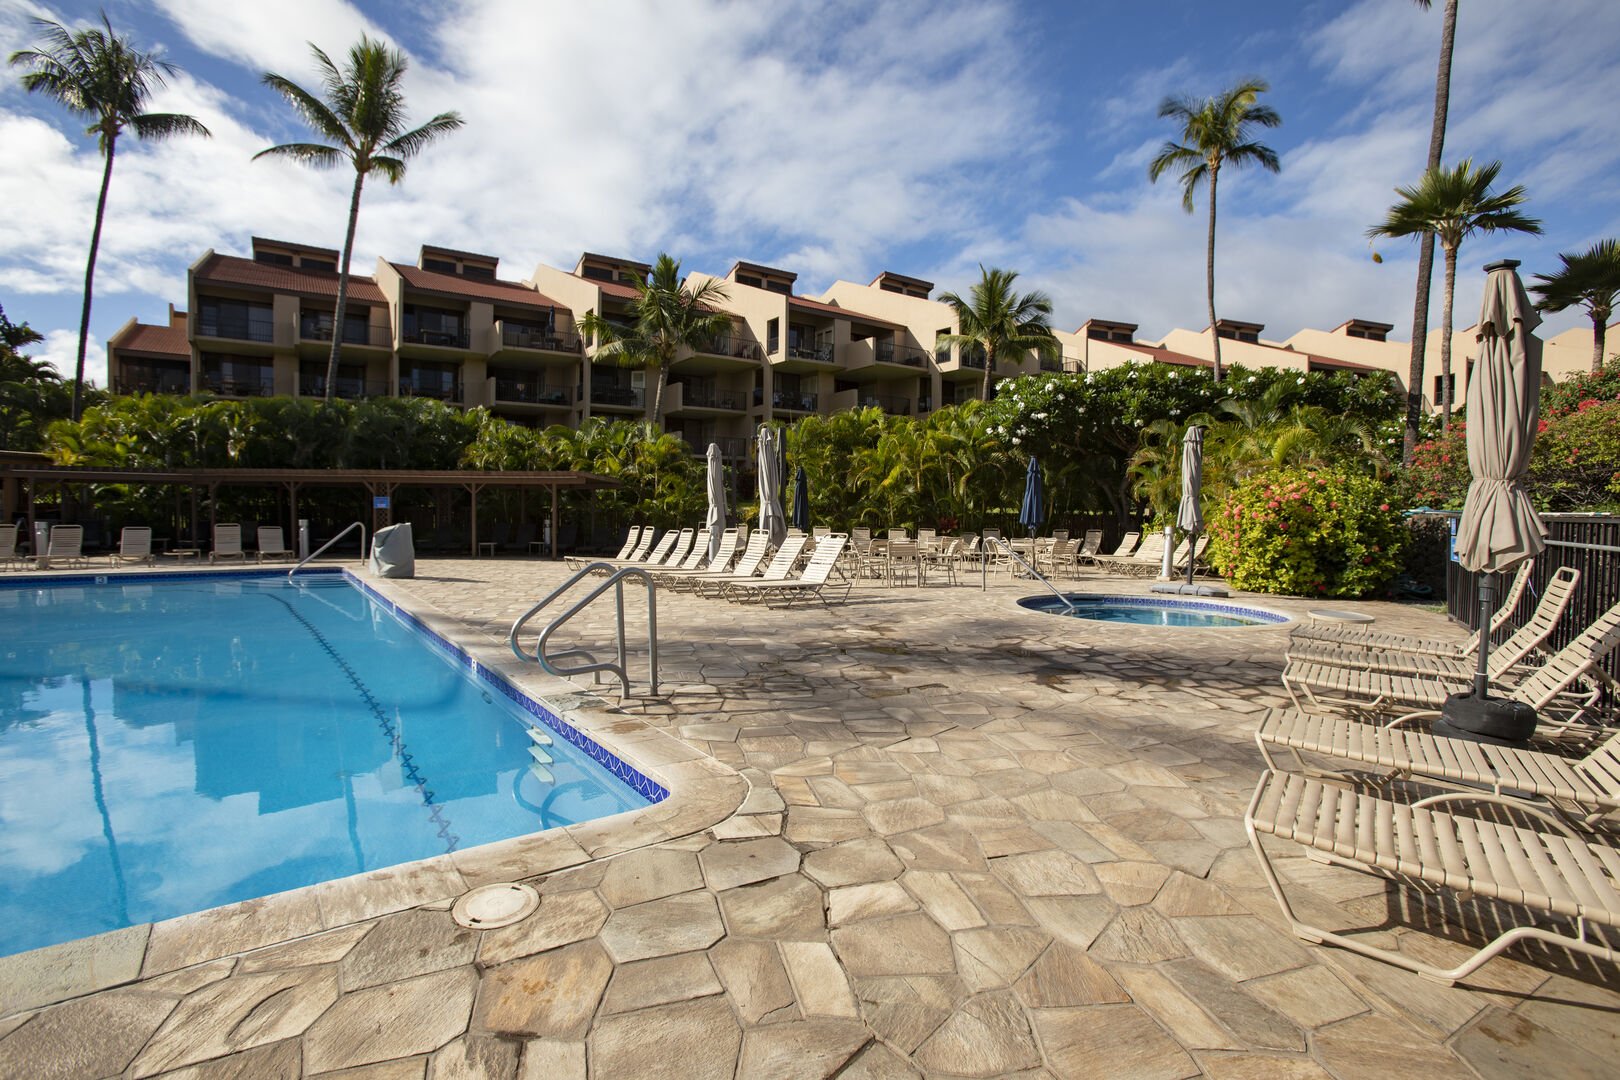 Have a dip in the large swimming pool and in the Family spa!